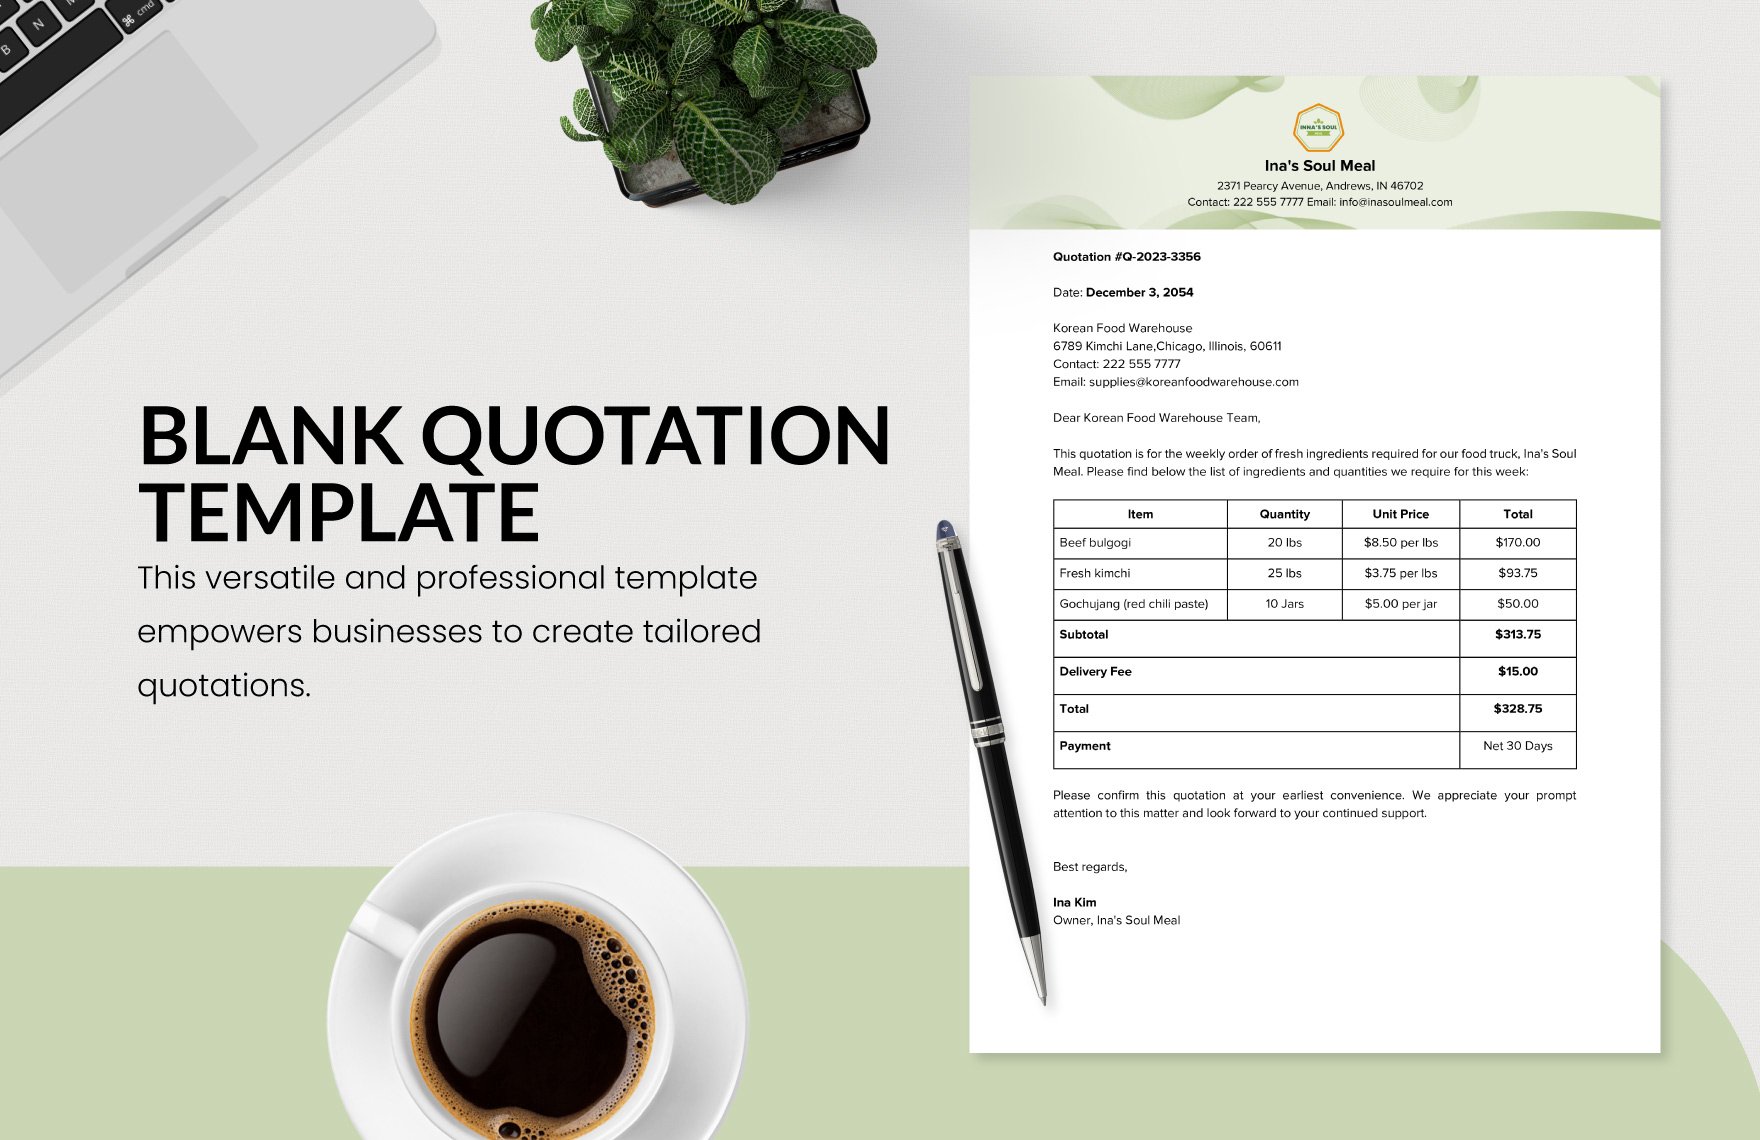 Blank Quotation Template